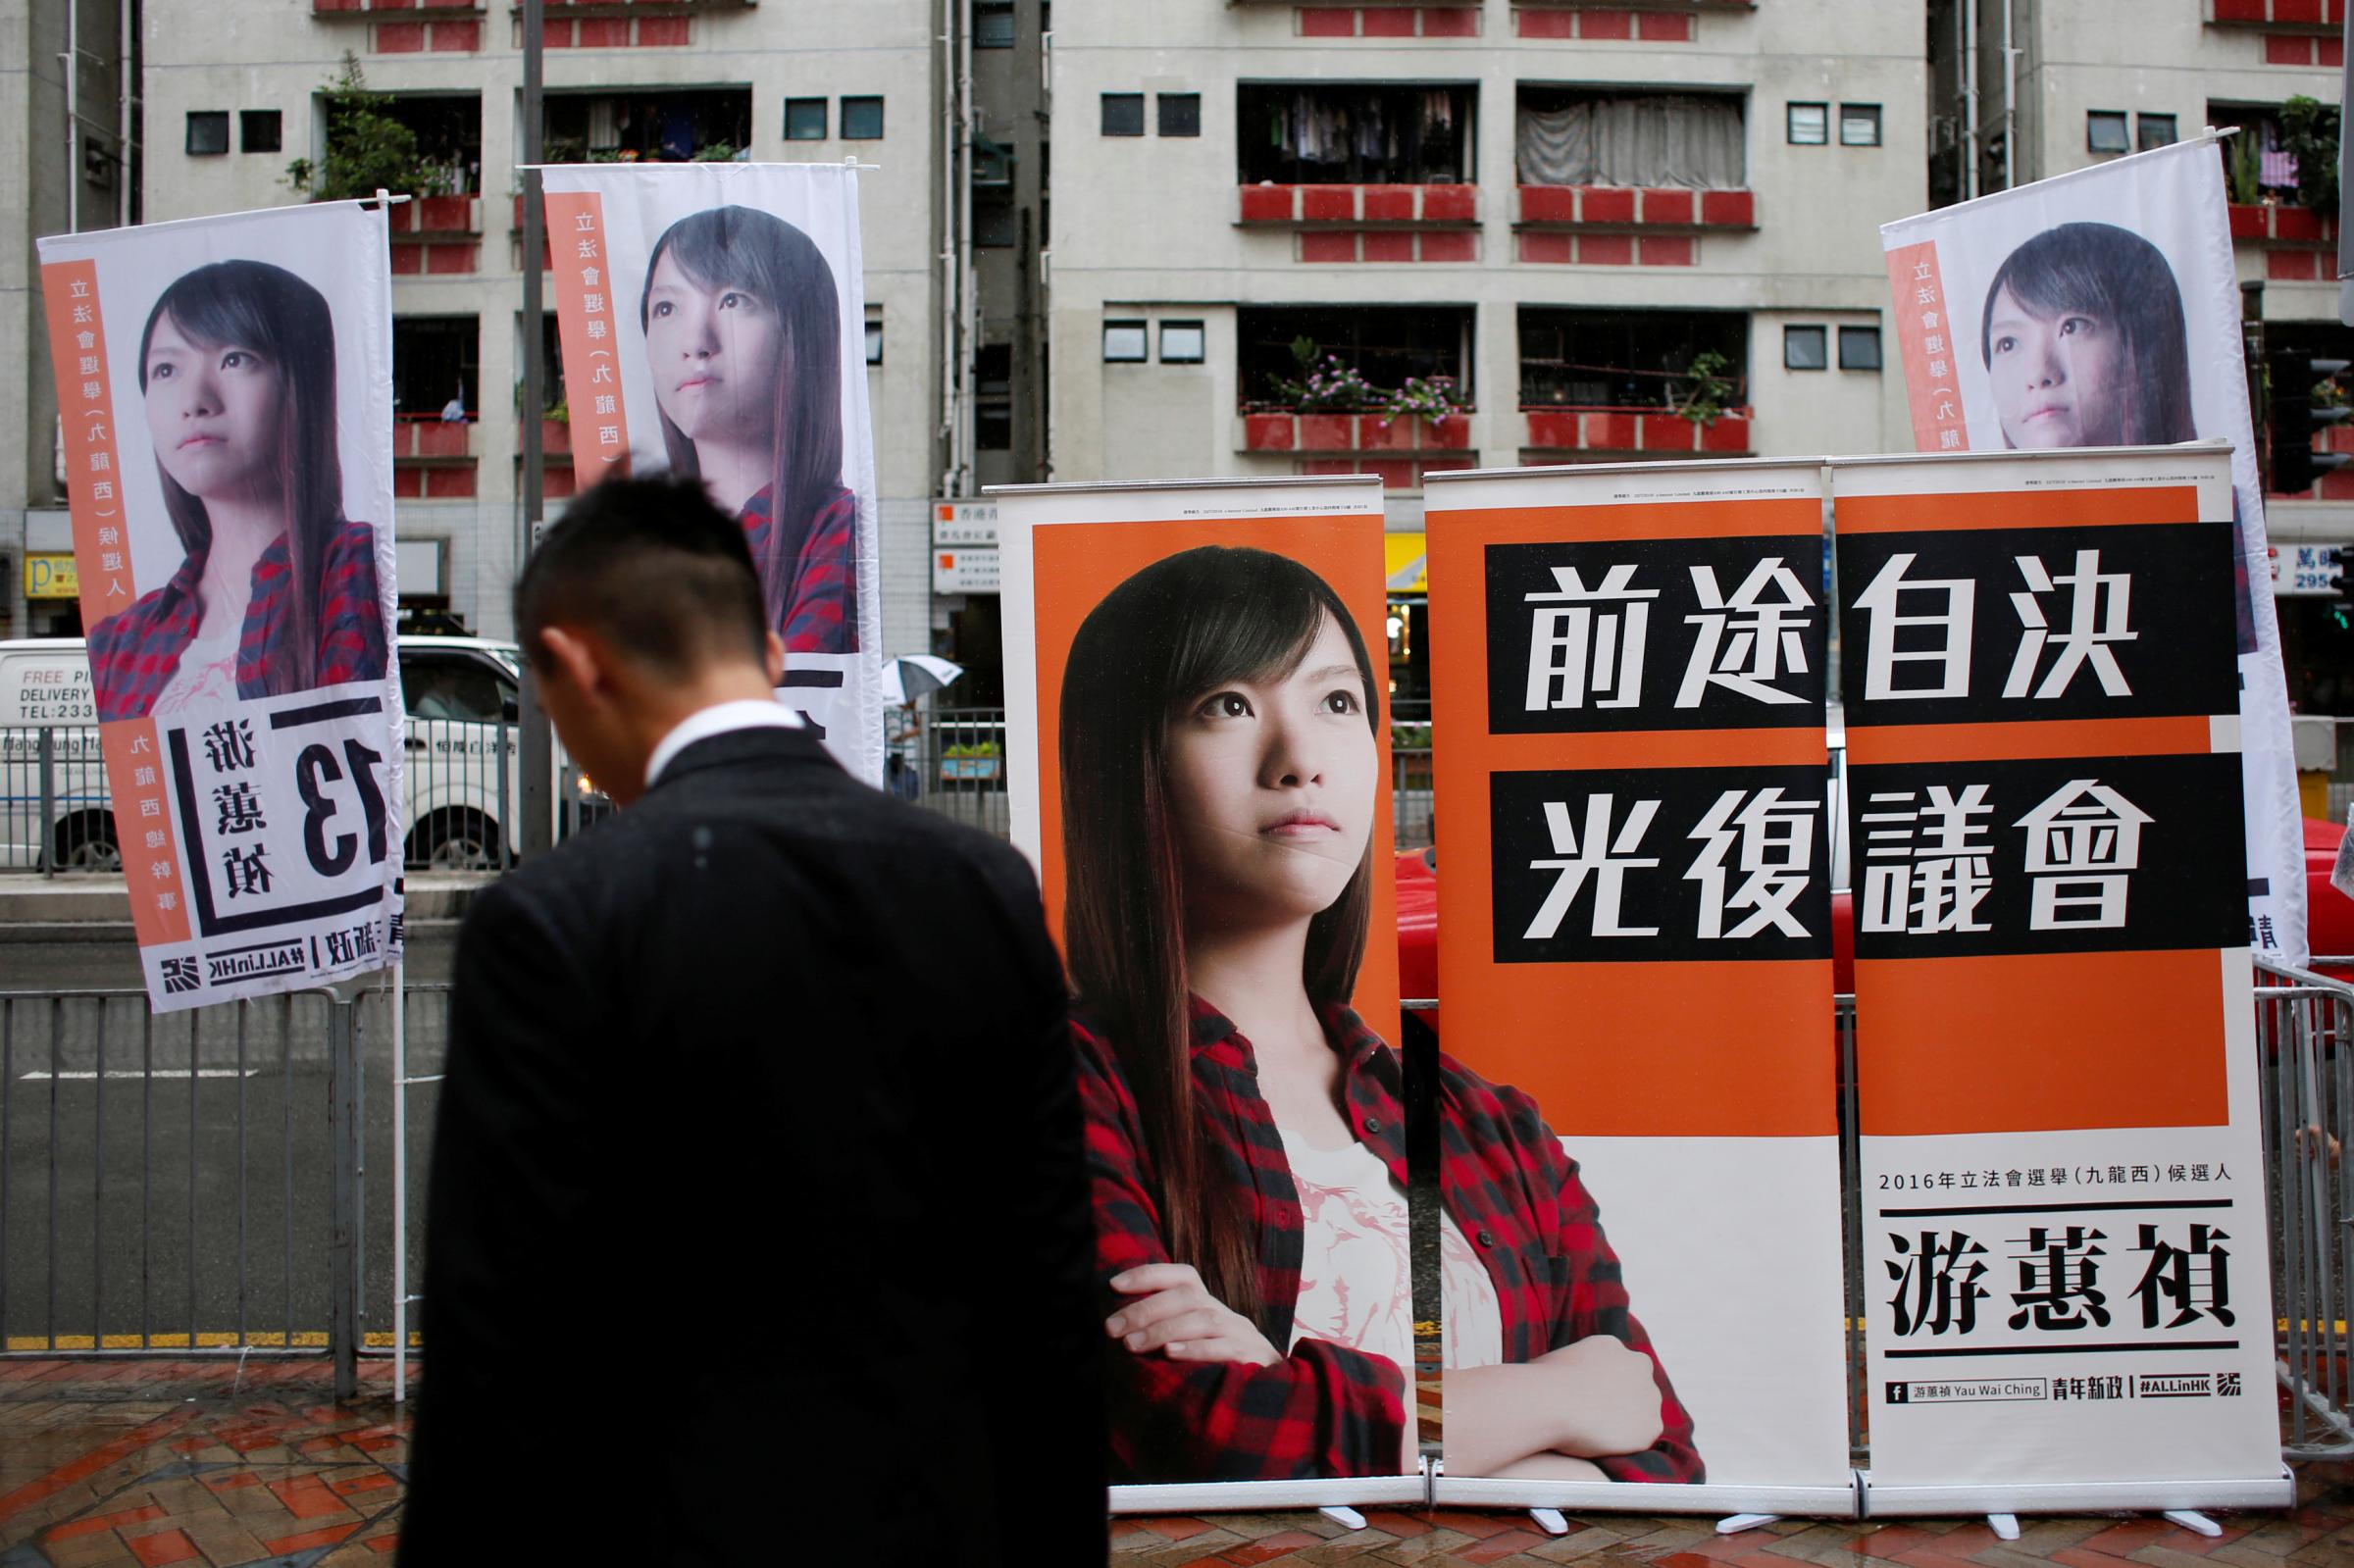 Campaign banners of Legislative Council election candidate Yau Wai-ching are displayed in Hong Kong